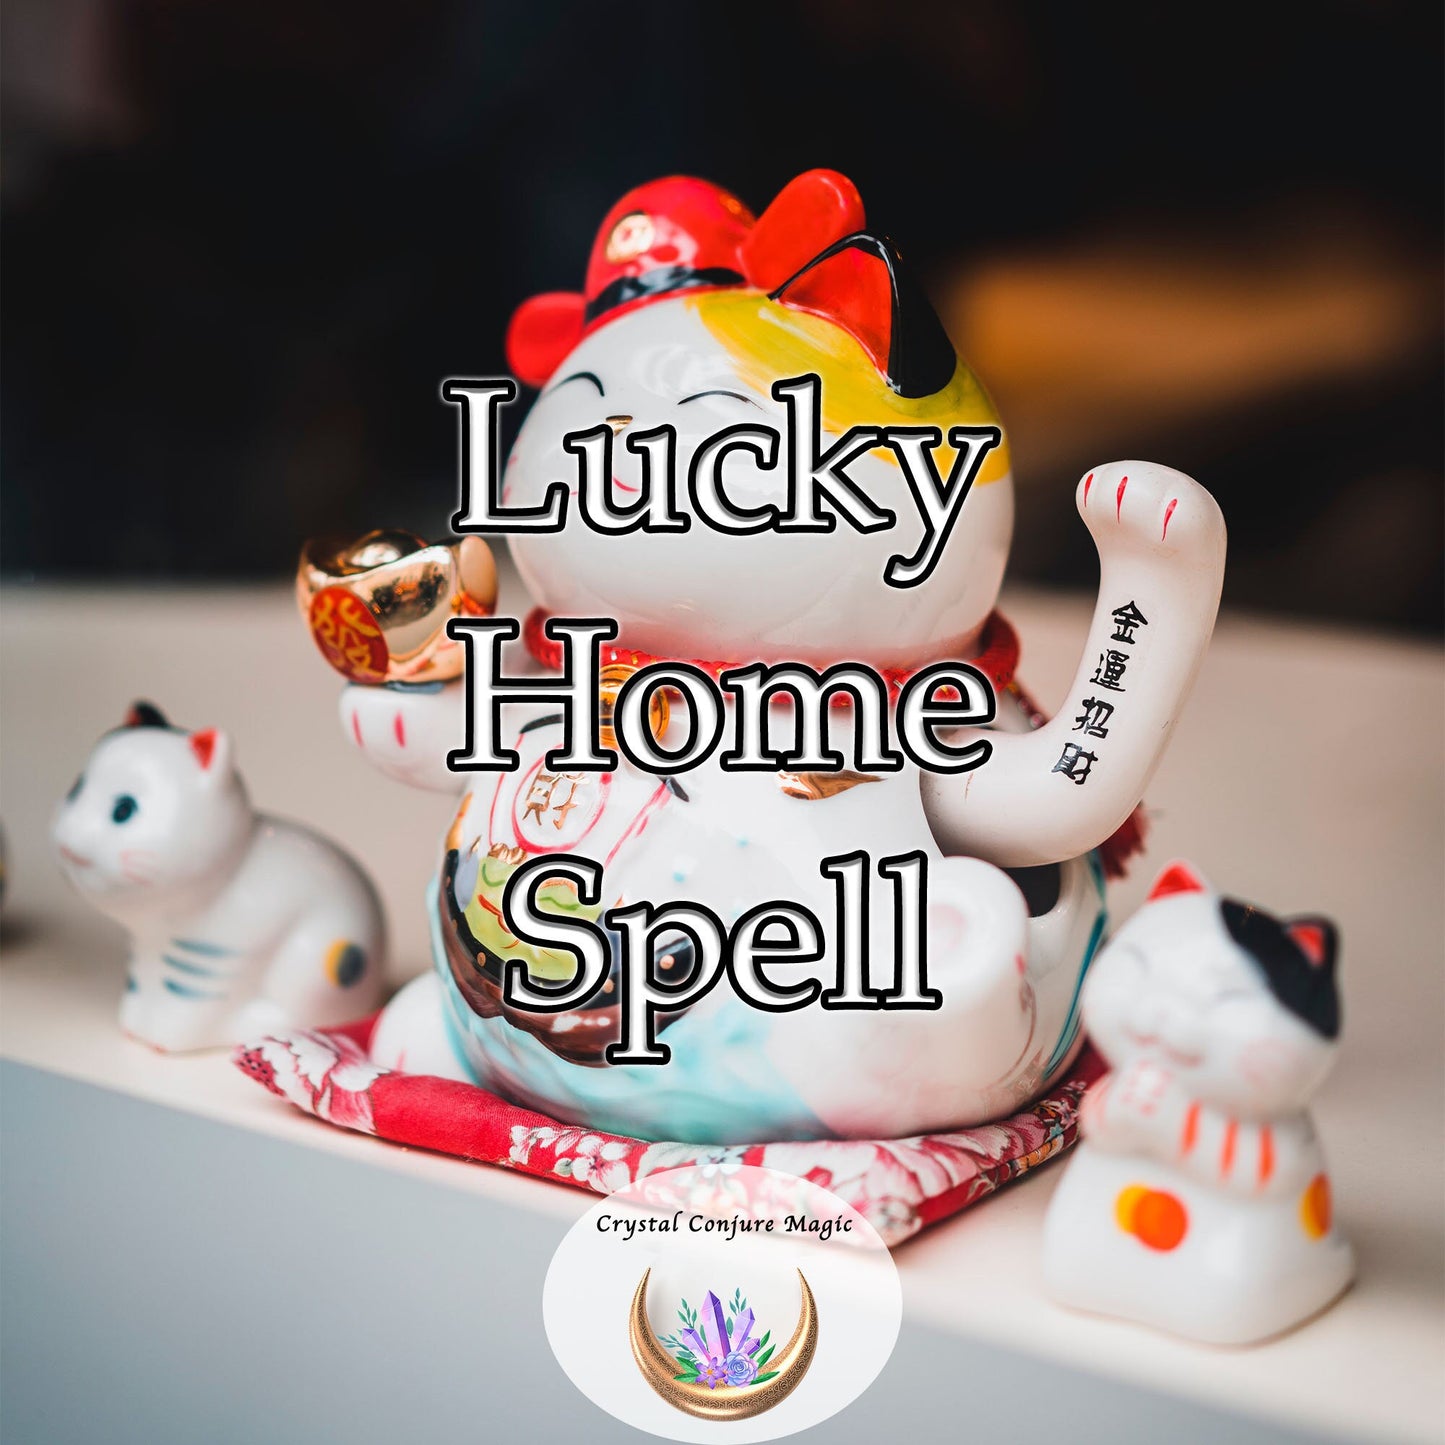 Lucky Home Spell - your life becomes a symphony of delightful happenstances, spontaneous joys, and uncanny luck.